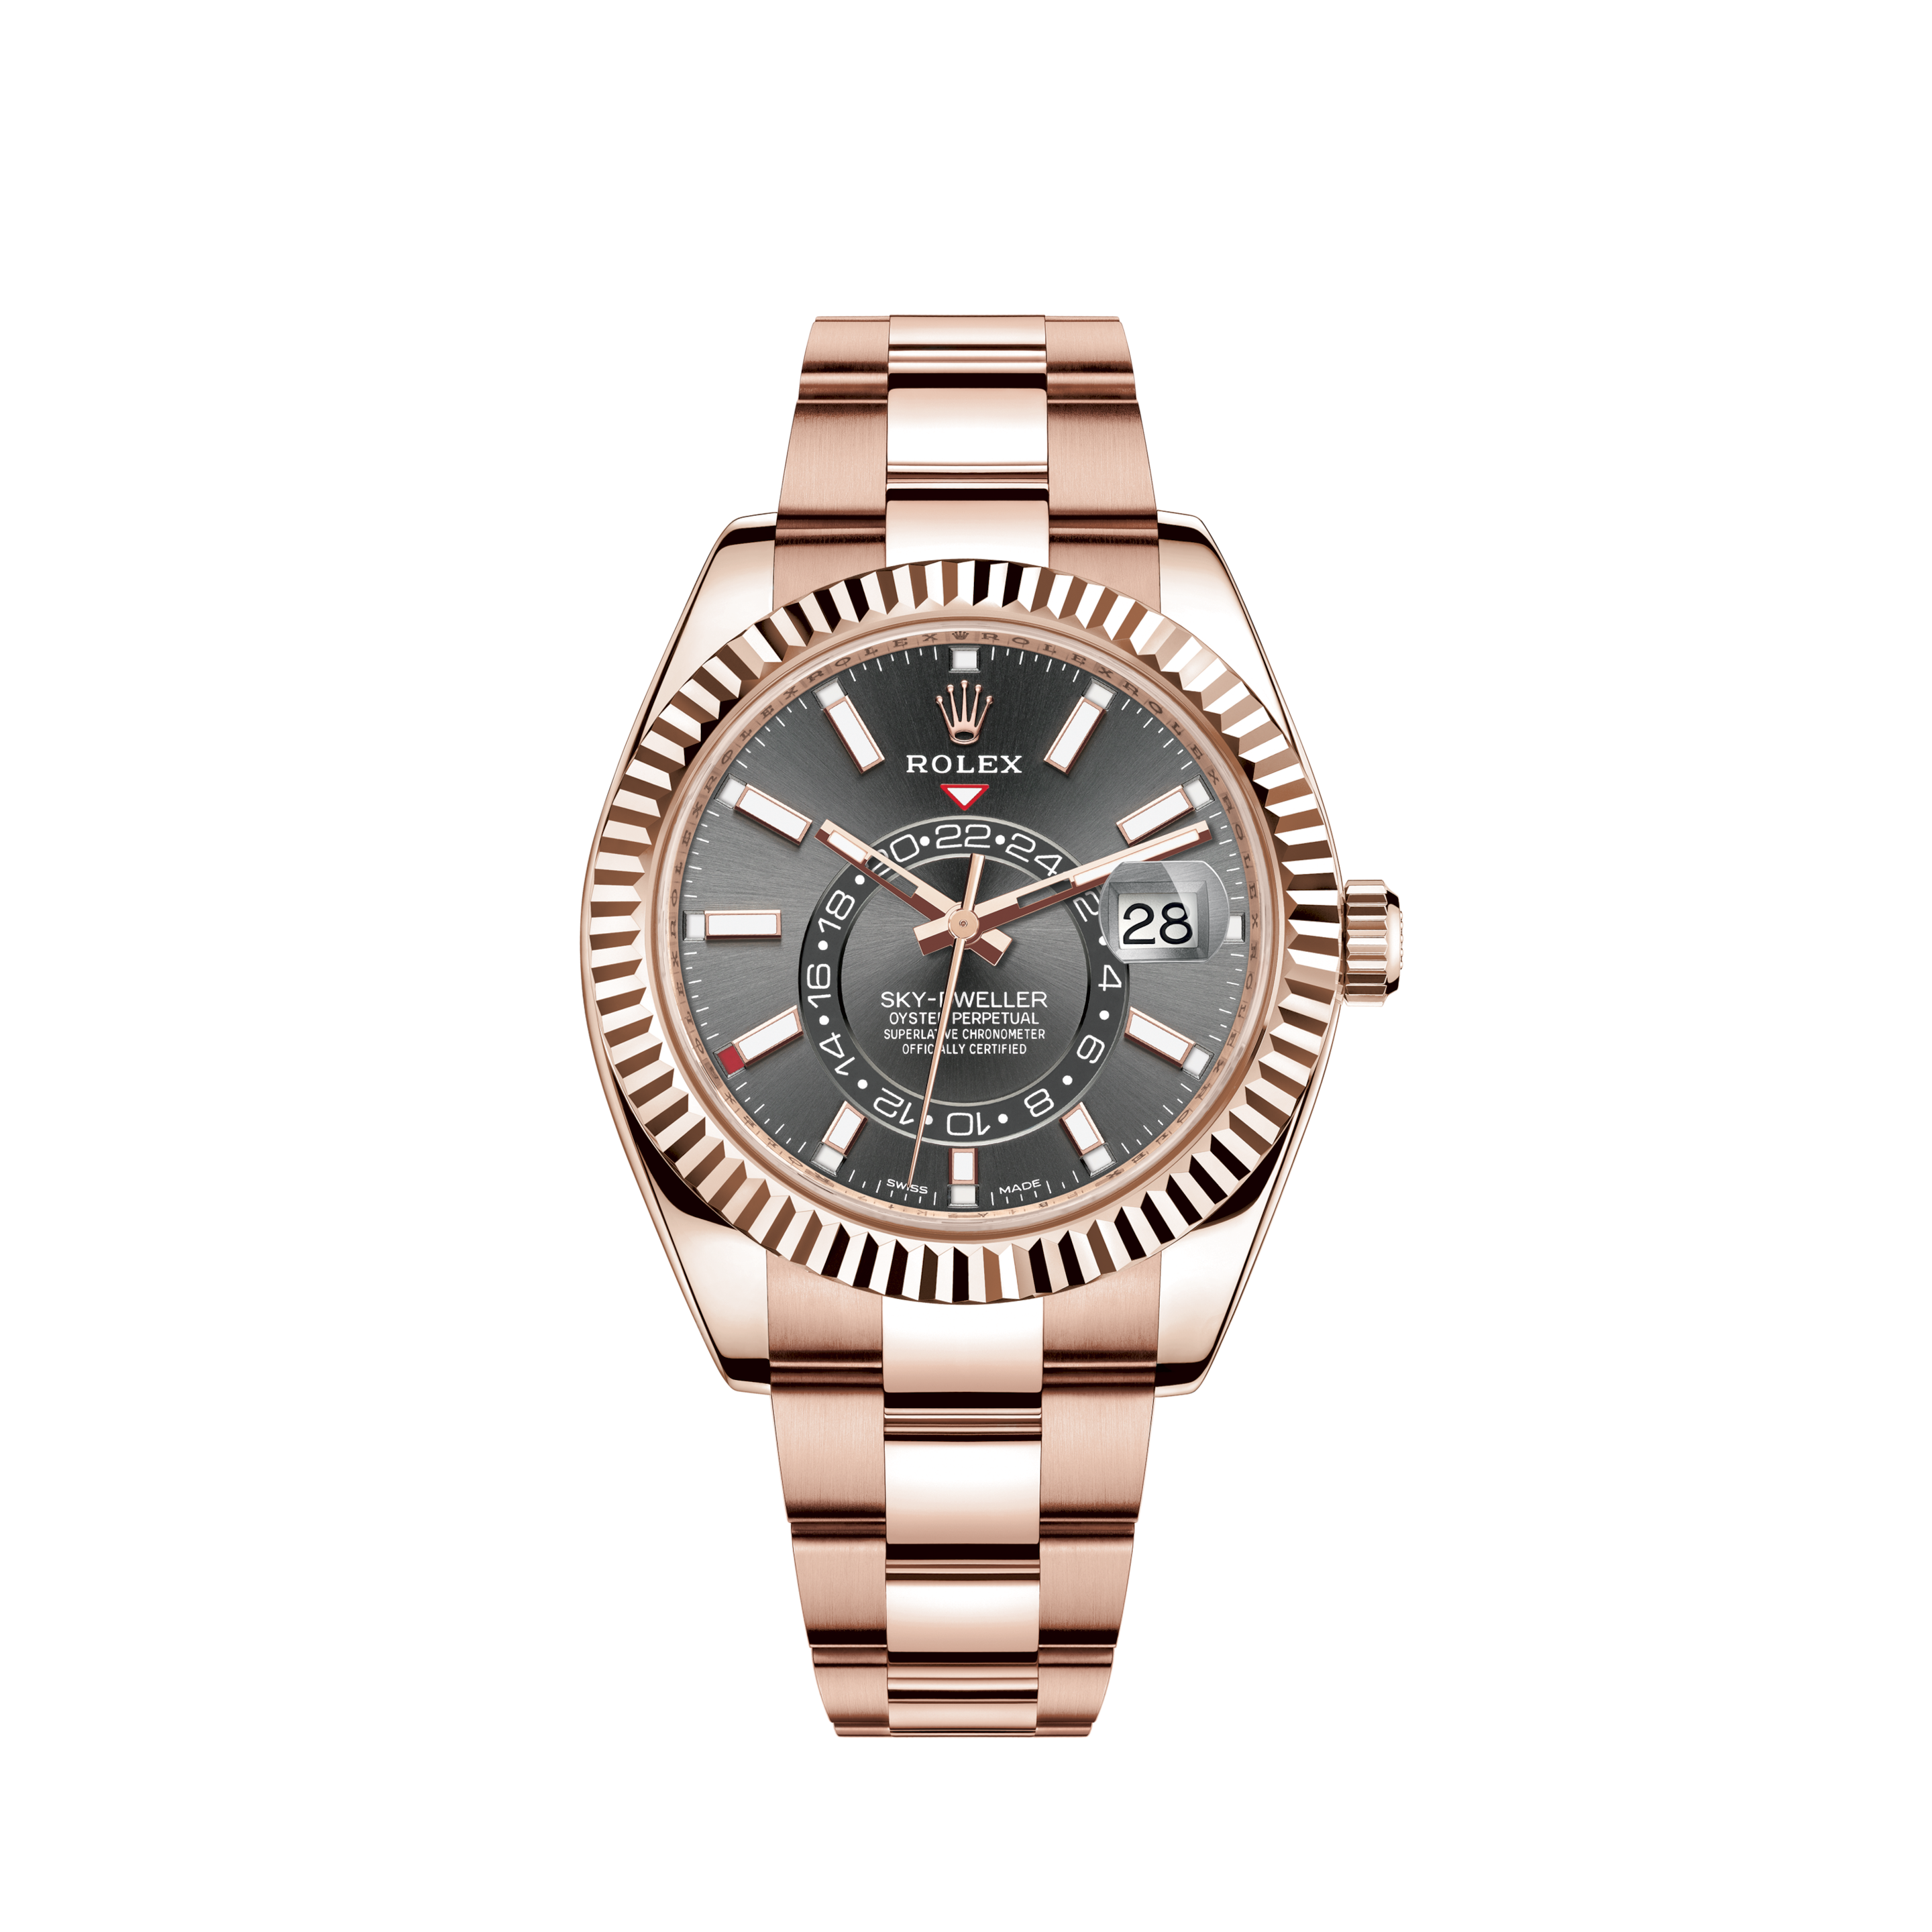 Rolex Datejust oyster perpetual